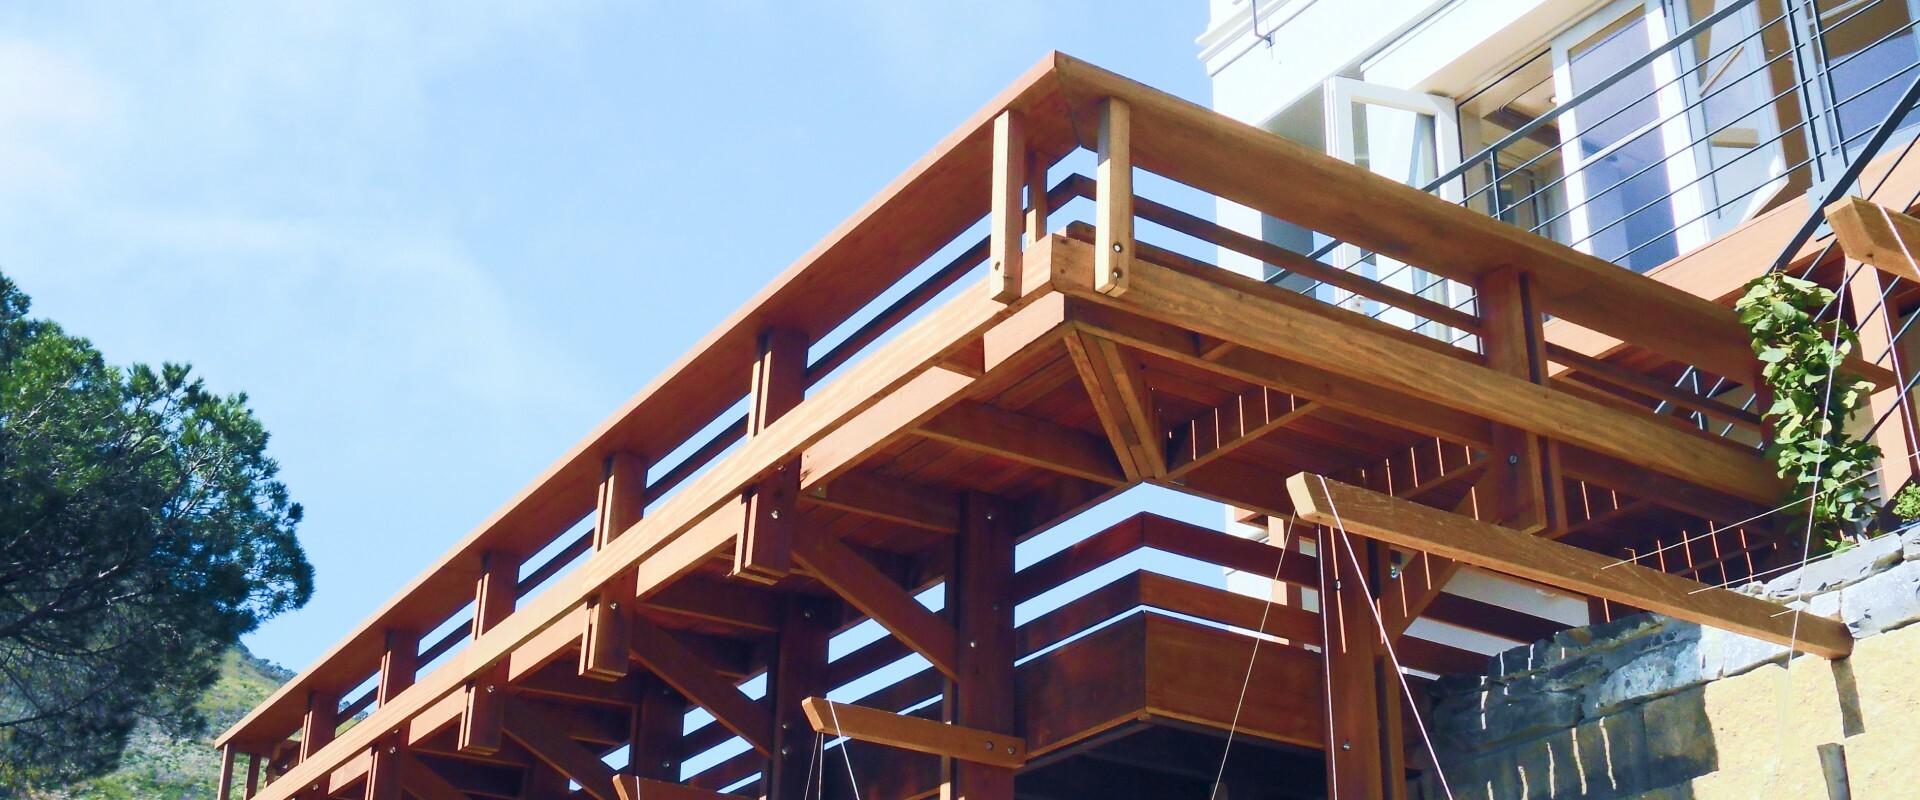 Suspended Timber Deck